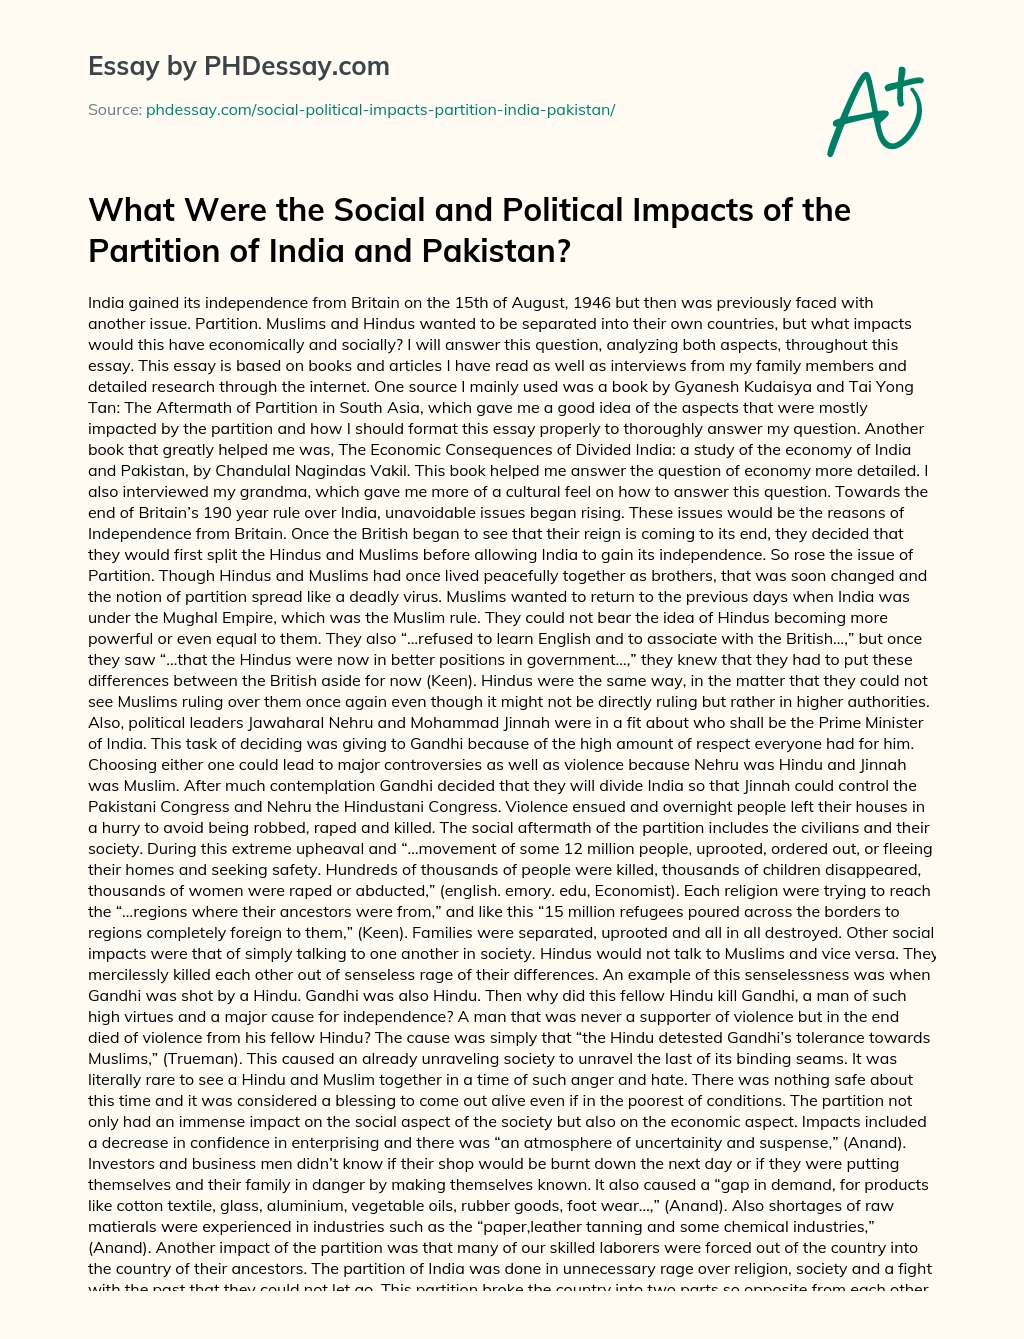 What Were the Social and Political Impacts of the Partition of India and Pakistan? essay